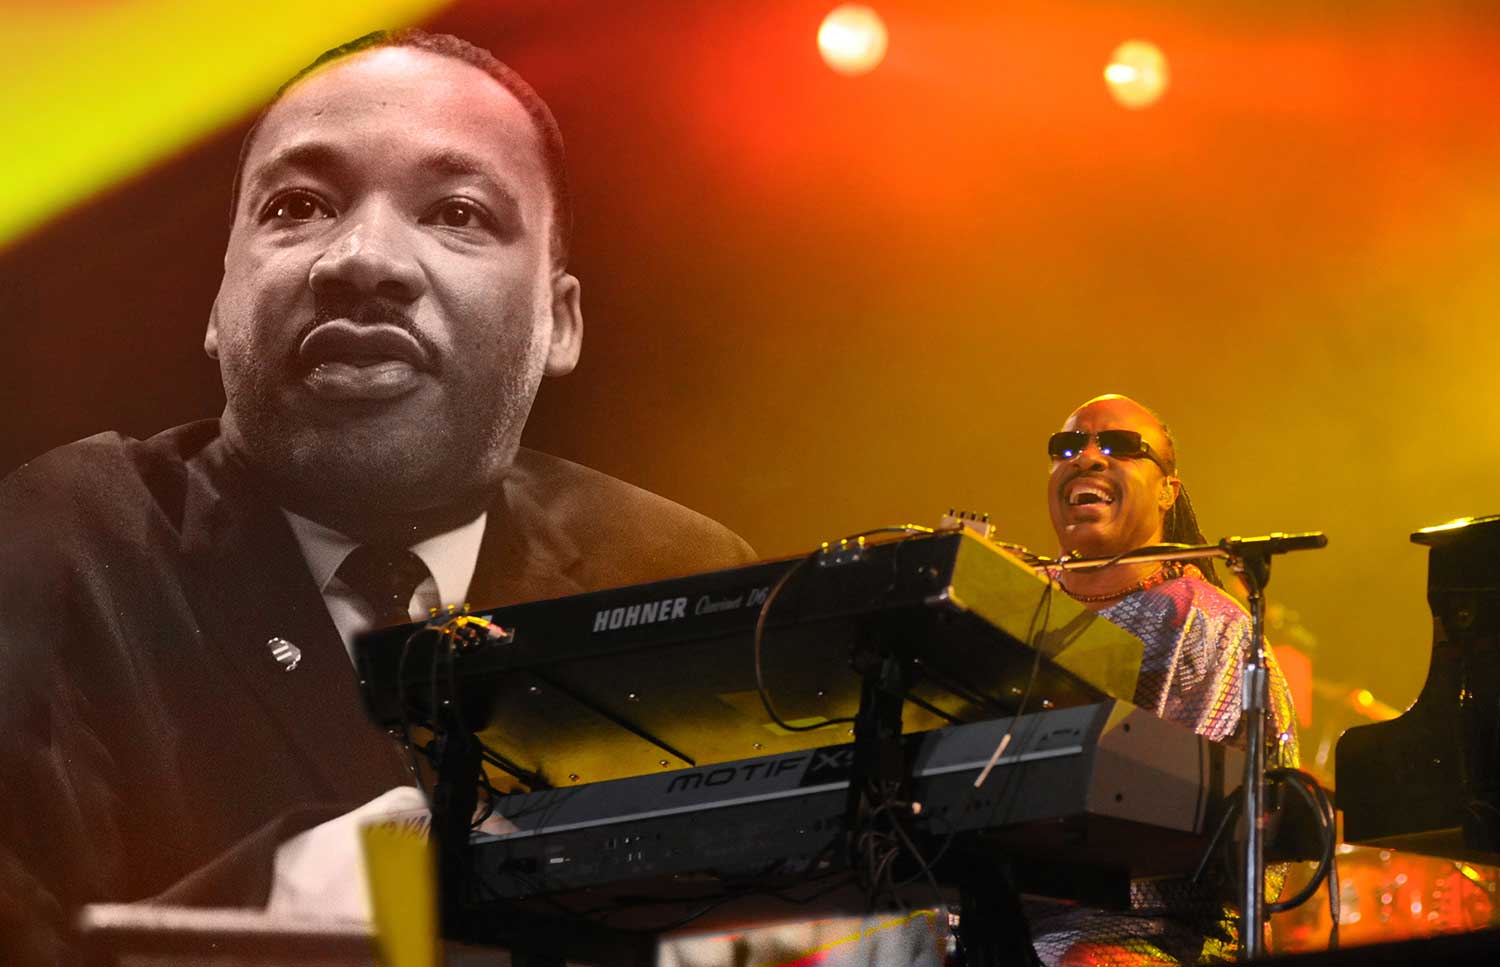 Stevie Wonder sits at a keyboard on the right with an image of Martin Luther King behind him.